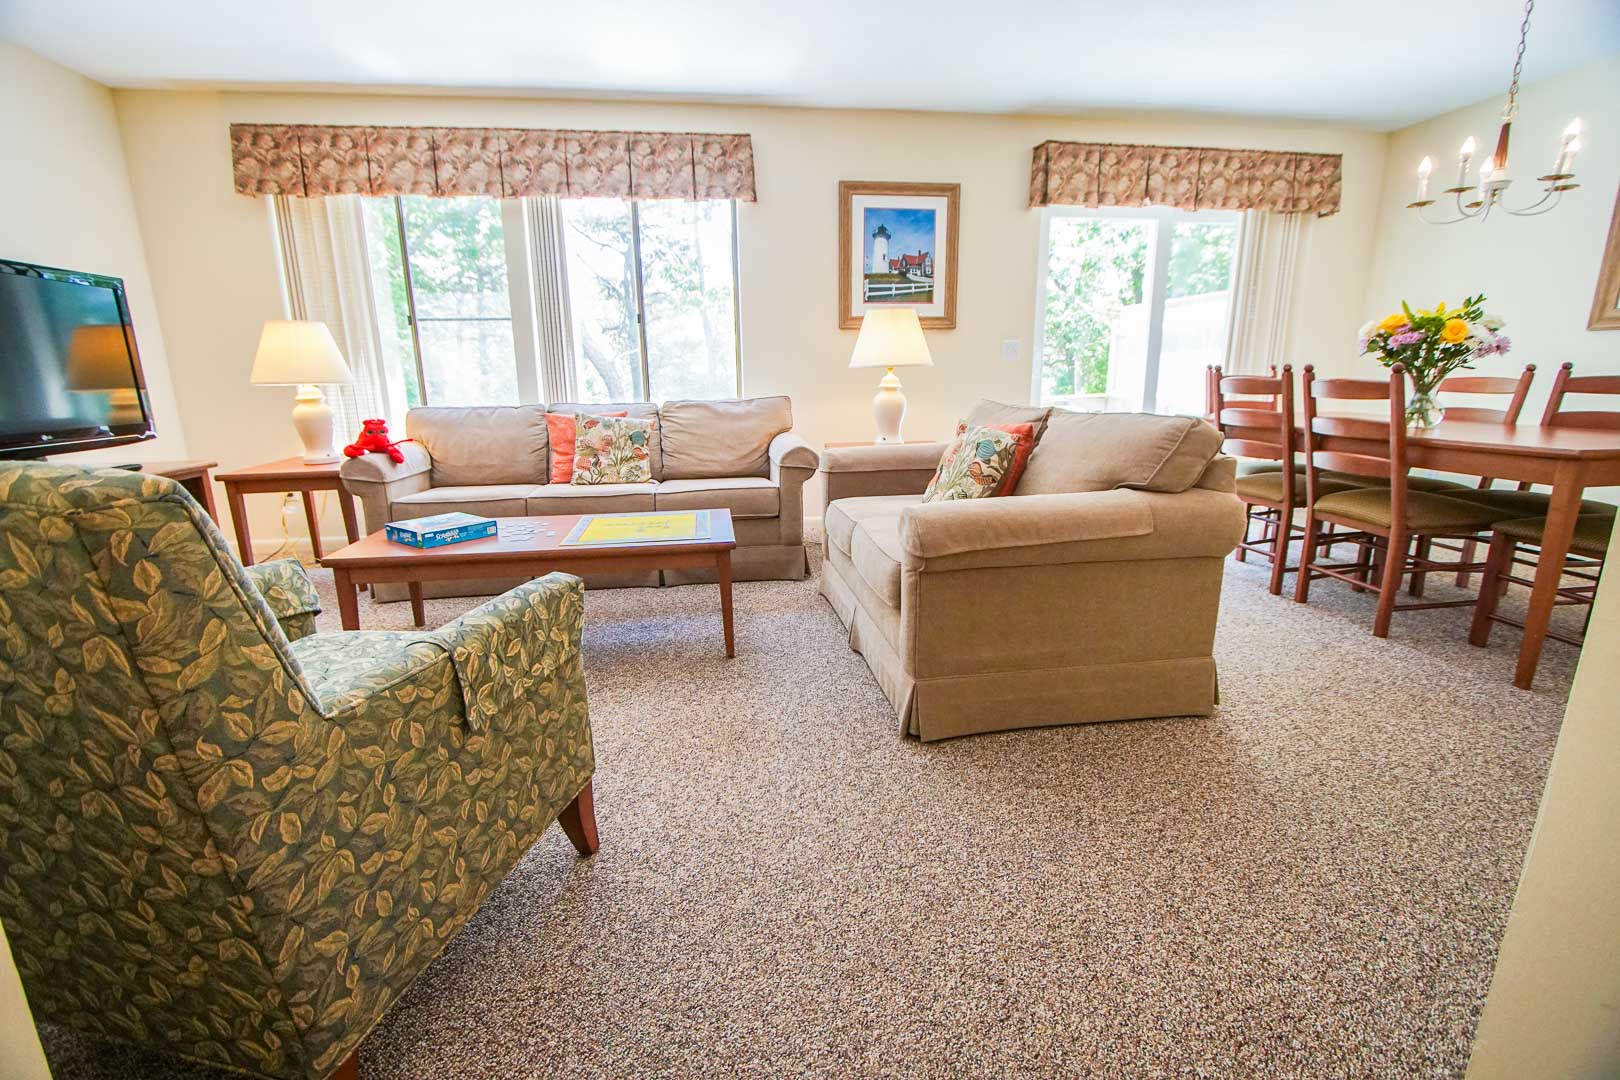 A cozy living and dining room area at VRI's Brewster Green Resort in Massachusetts.